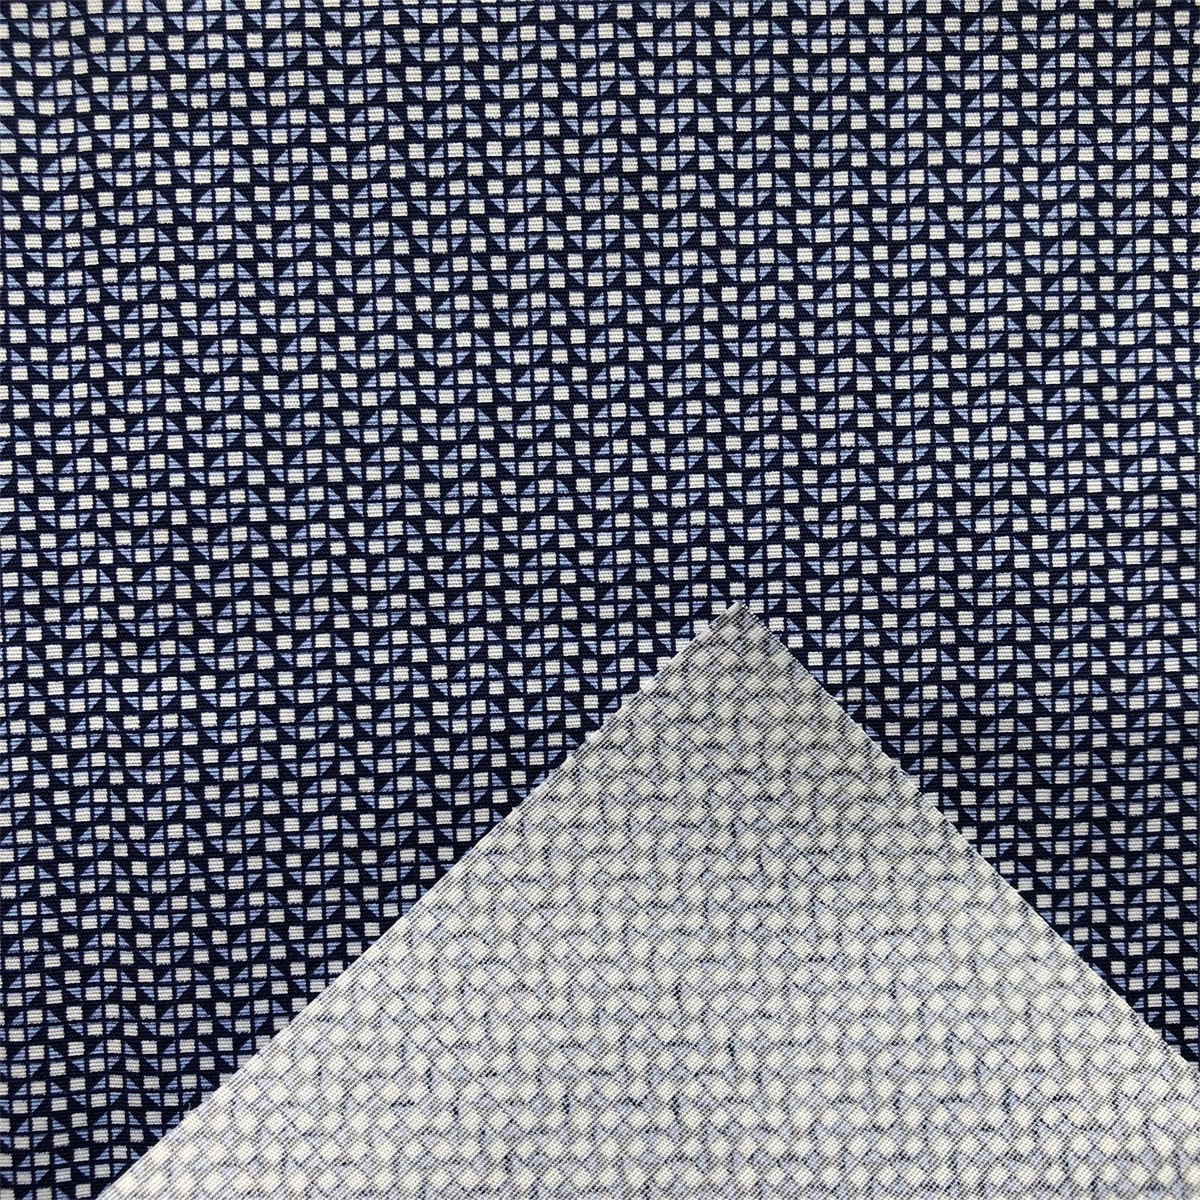 China Cotton Spandex Printed Fabric by compact yarn for men's shirts 98% cotton 2% spandex poplin printed shirts woven elasthane fabric